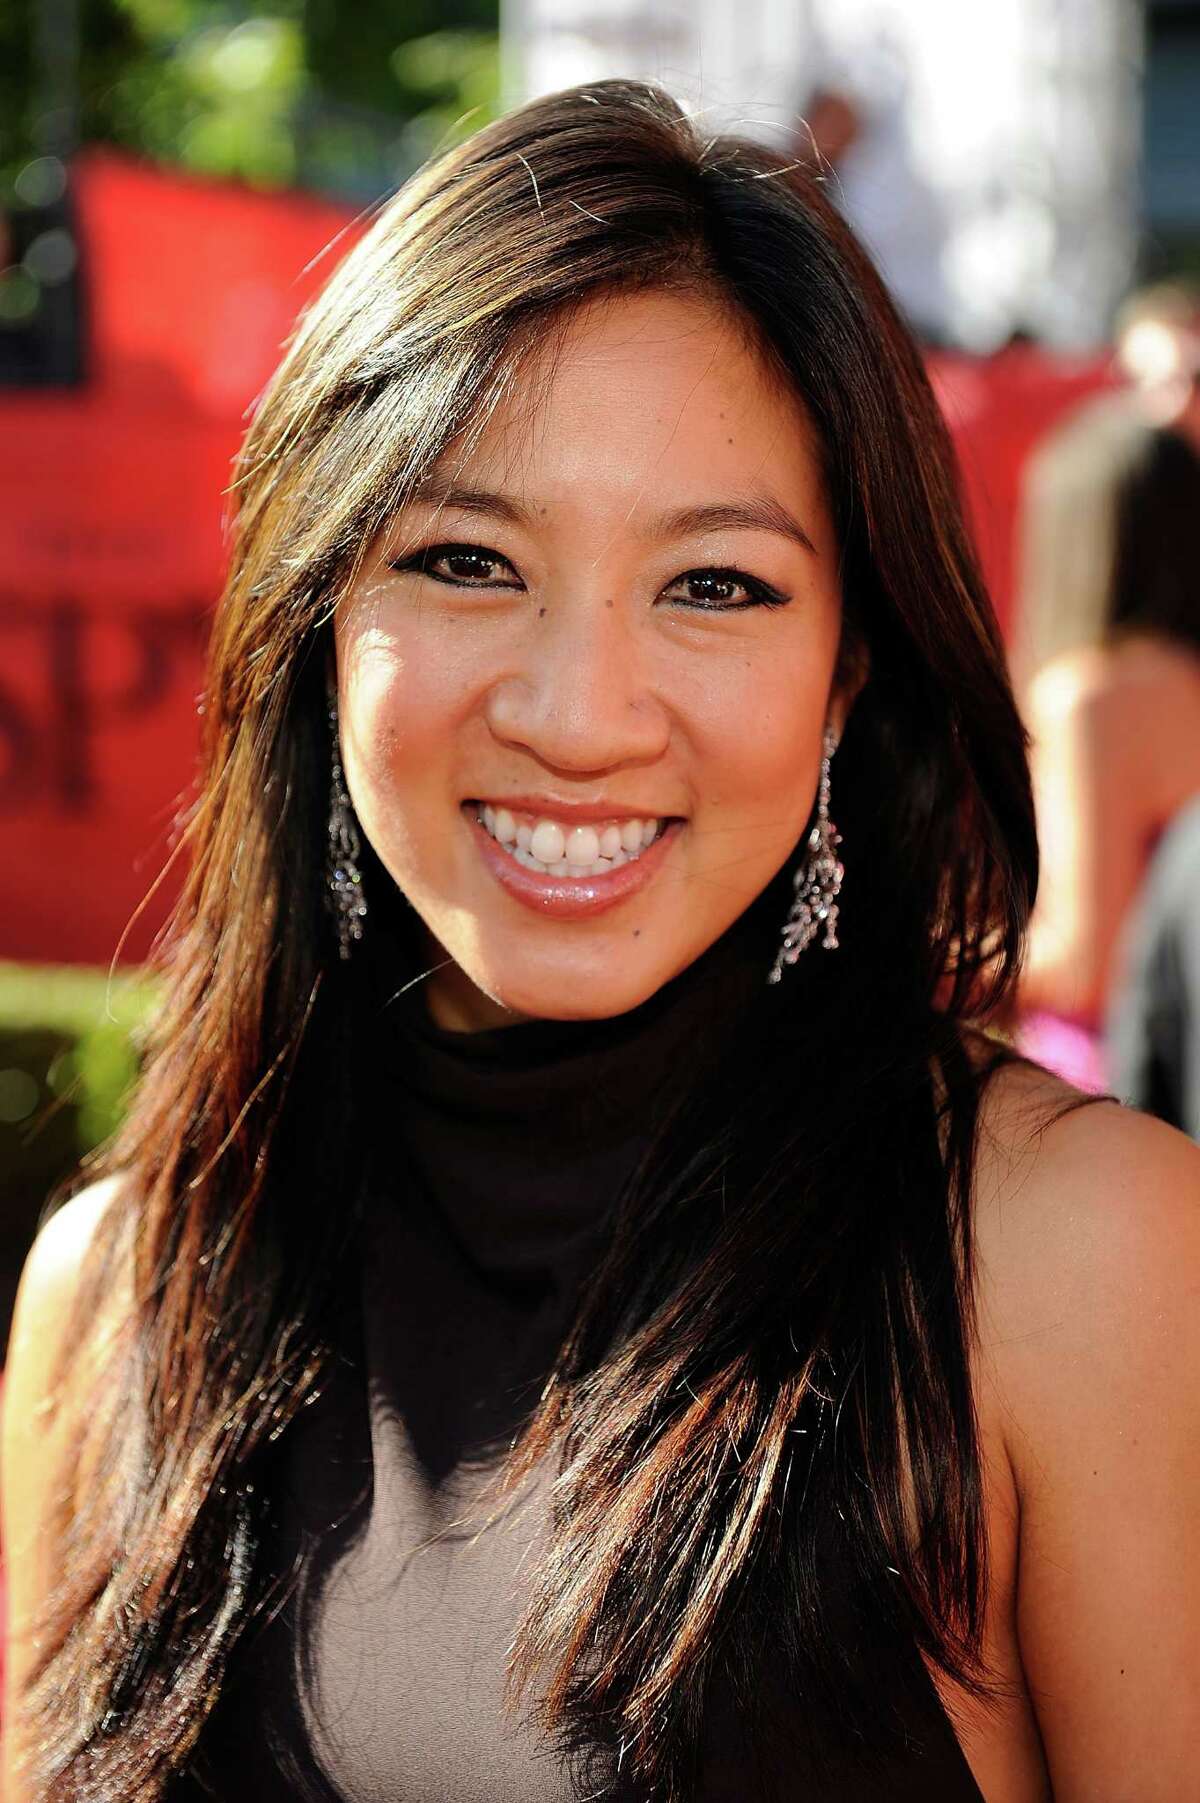 LOS ANGELES, CA - JULY 15: Olympic Ice skater Michelle Kwan arrives at the 2009 ESPY Awards held at Nokia Theatre LA Live on July 15, 2009 in Los Angeles, California. The 17th annual ESPYs will air on Sunday, July 19 at 9PM ET on ESPN. (Photo by Kevork Djansezian/Getty Images for ESPY)